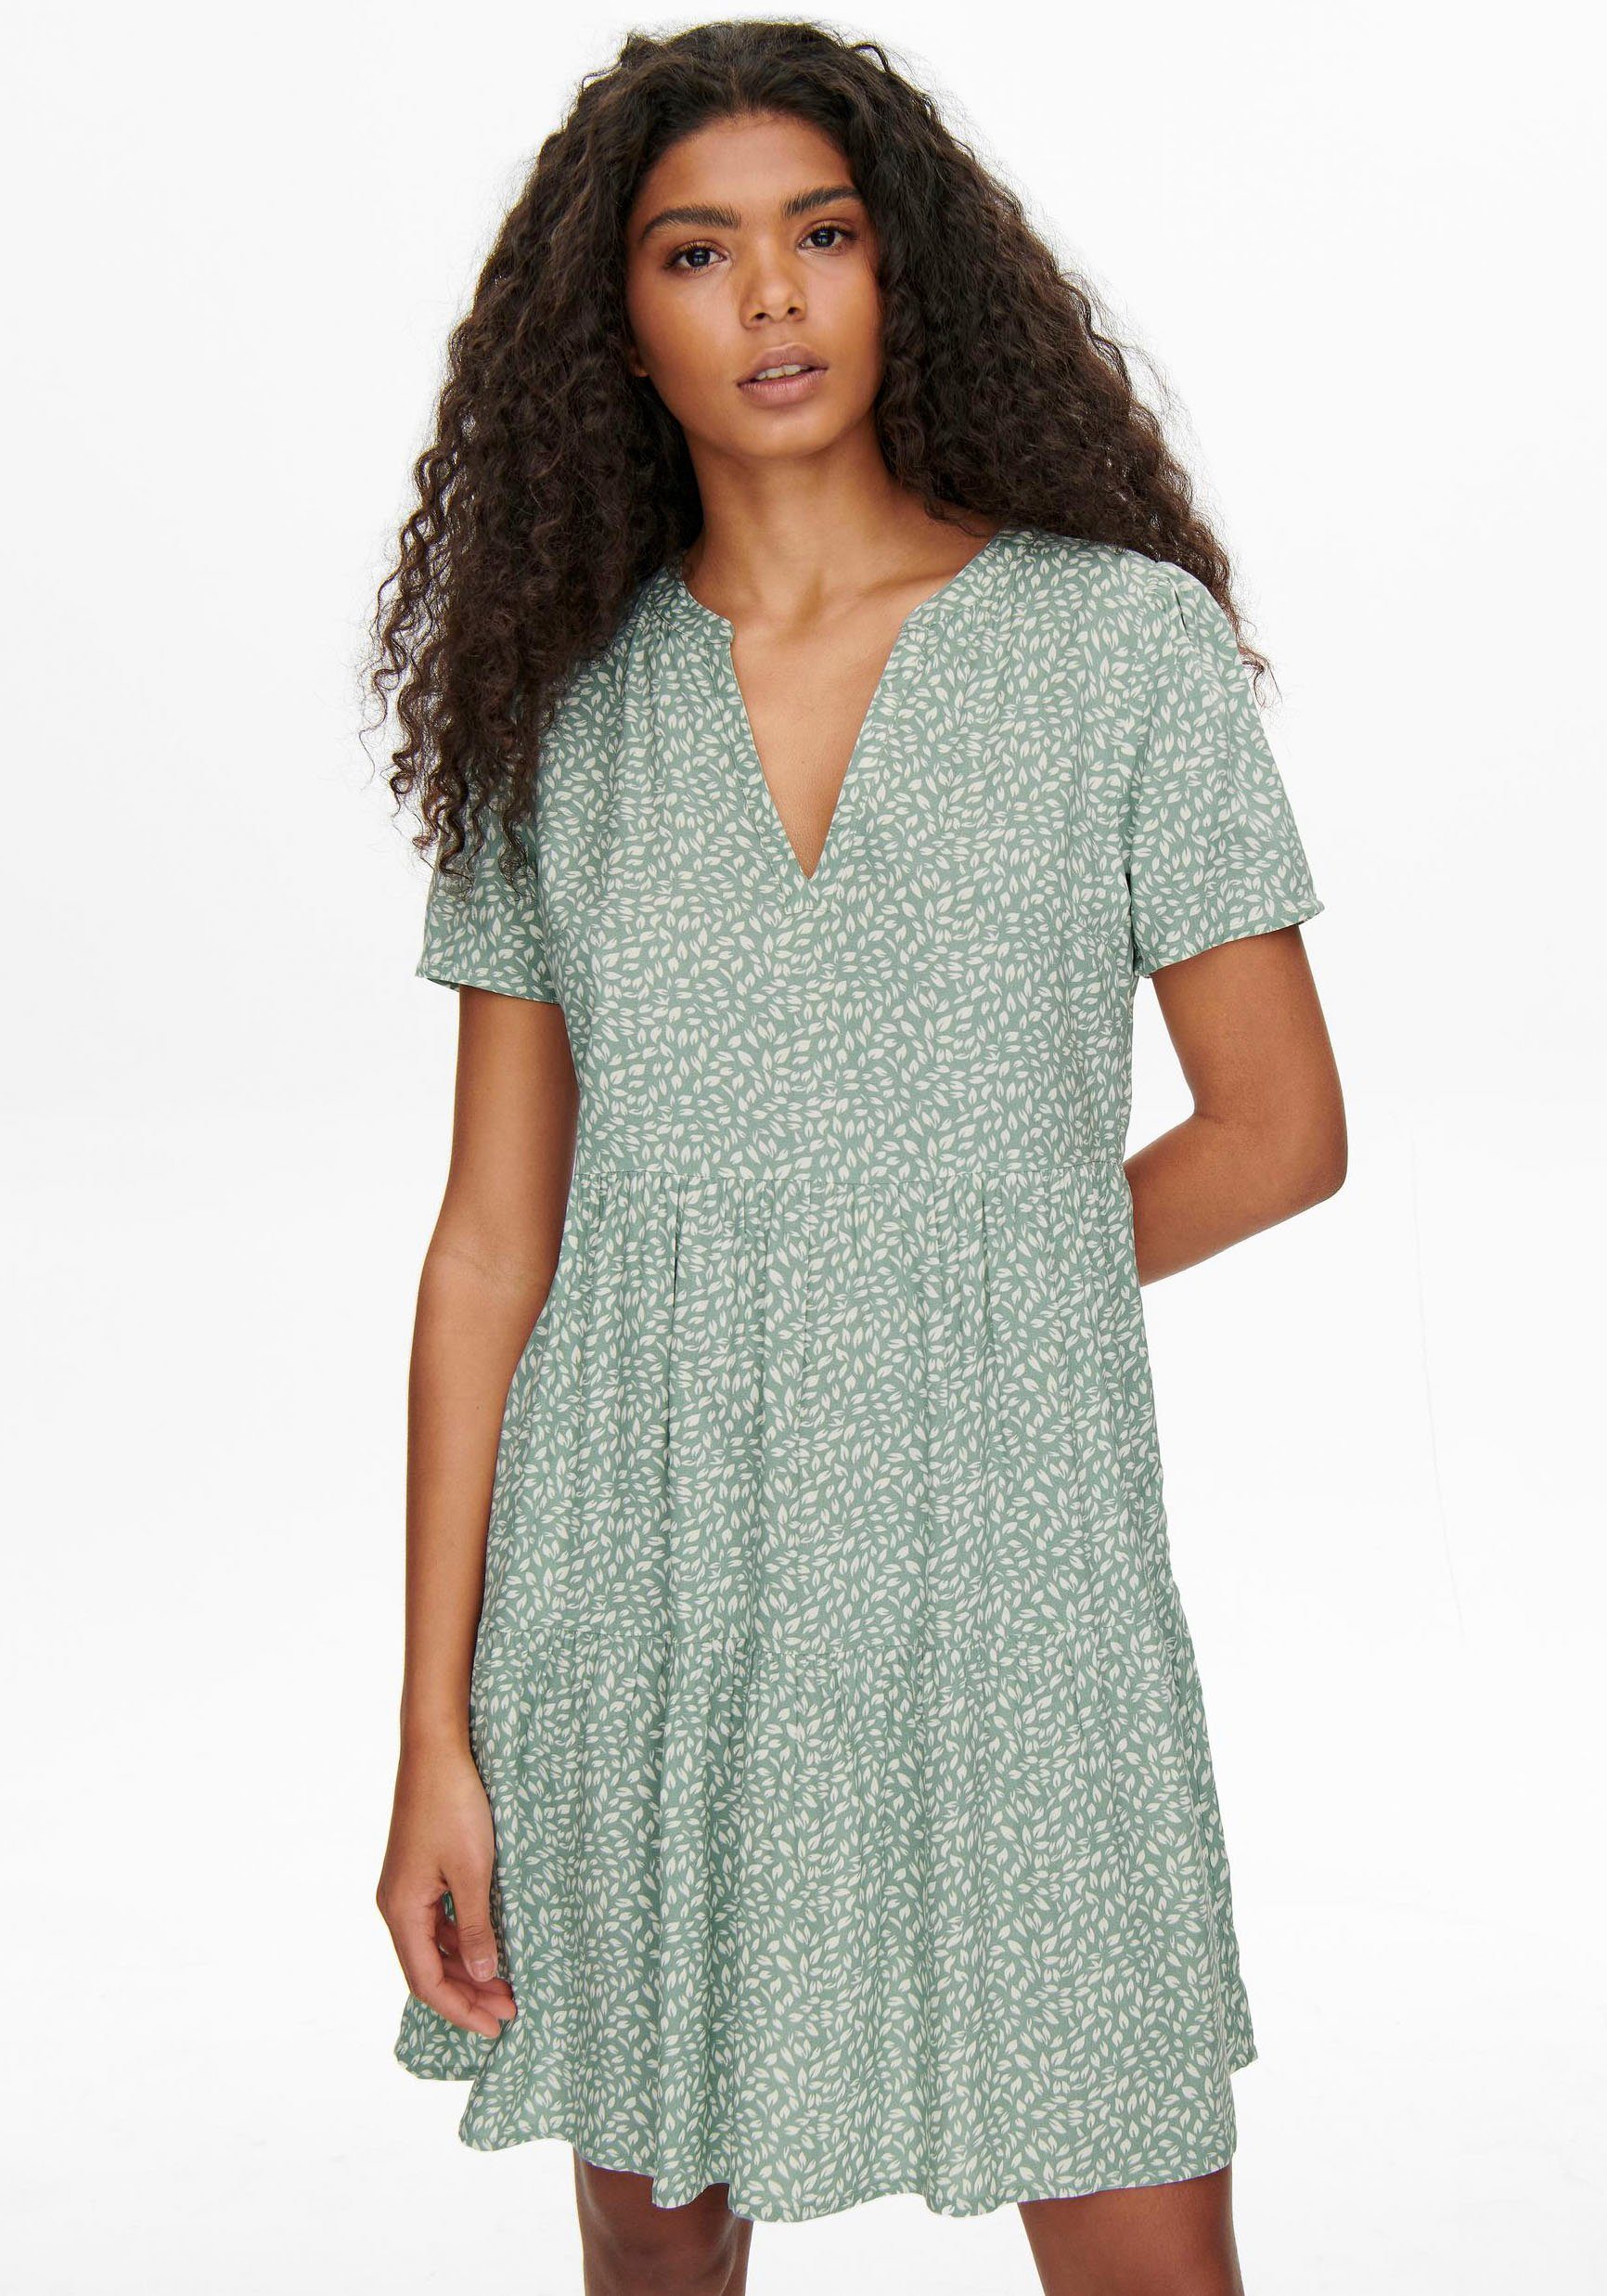 PTM ONLY LIFE NOOS THEA Green DRESS ONLZALLY Chinois S/S leafs AOP:White Sommerkleid